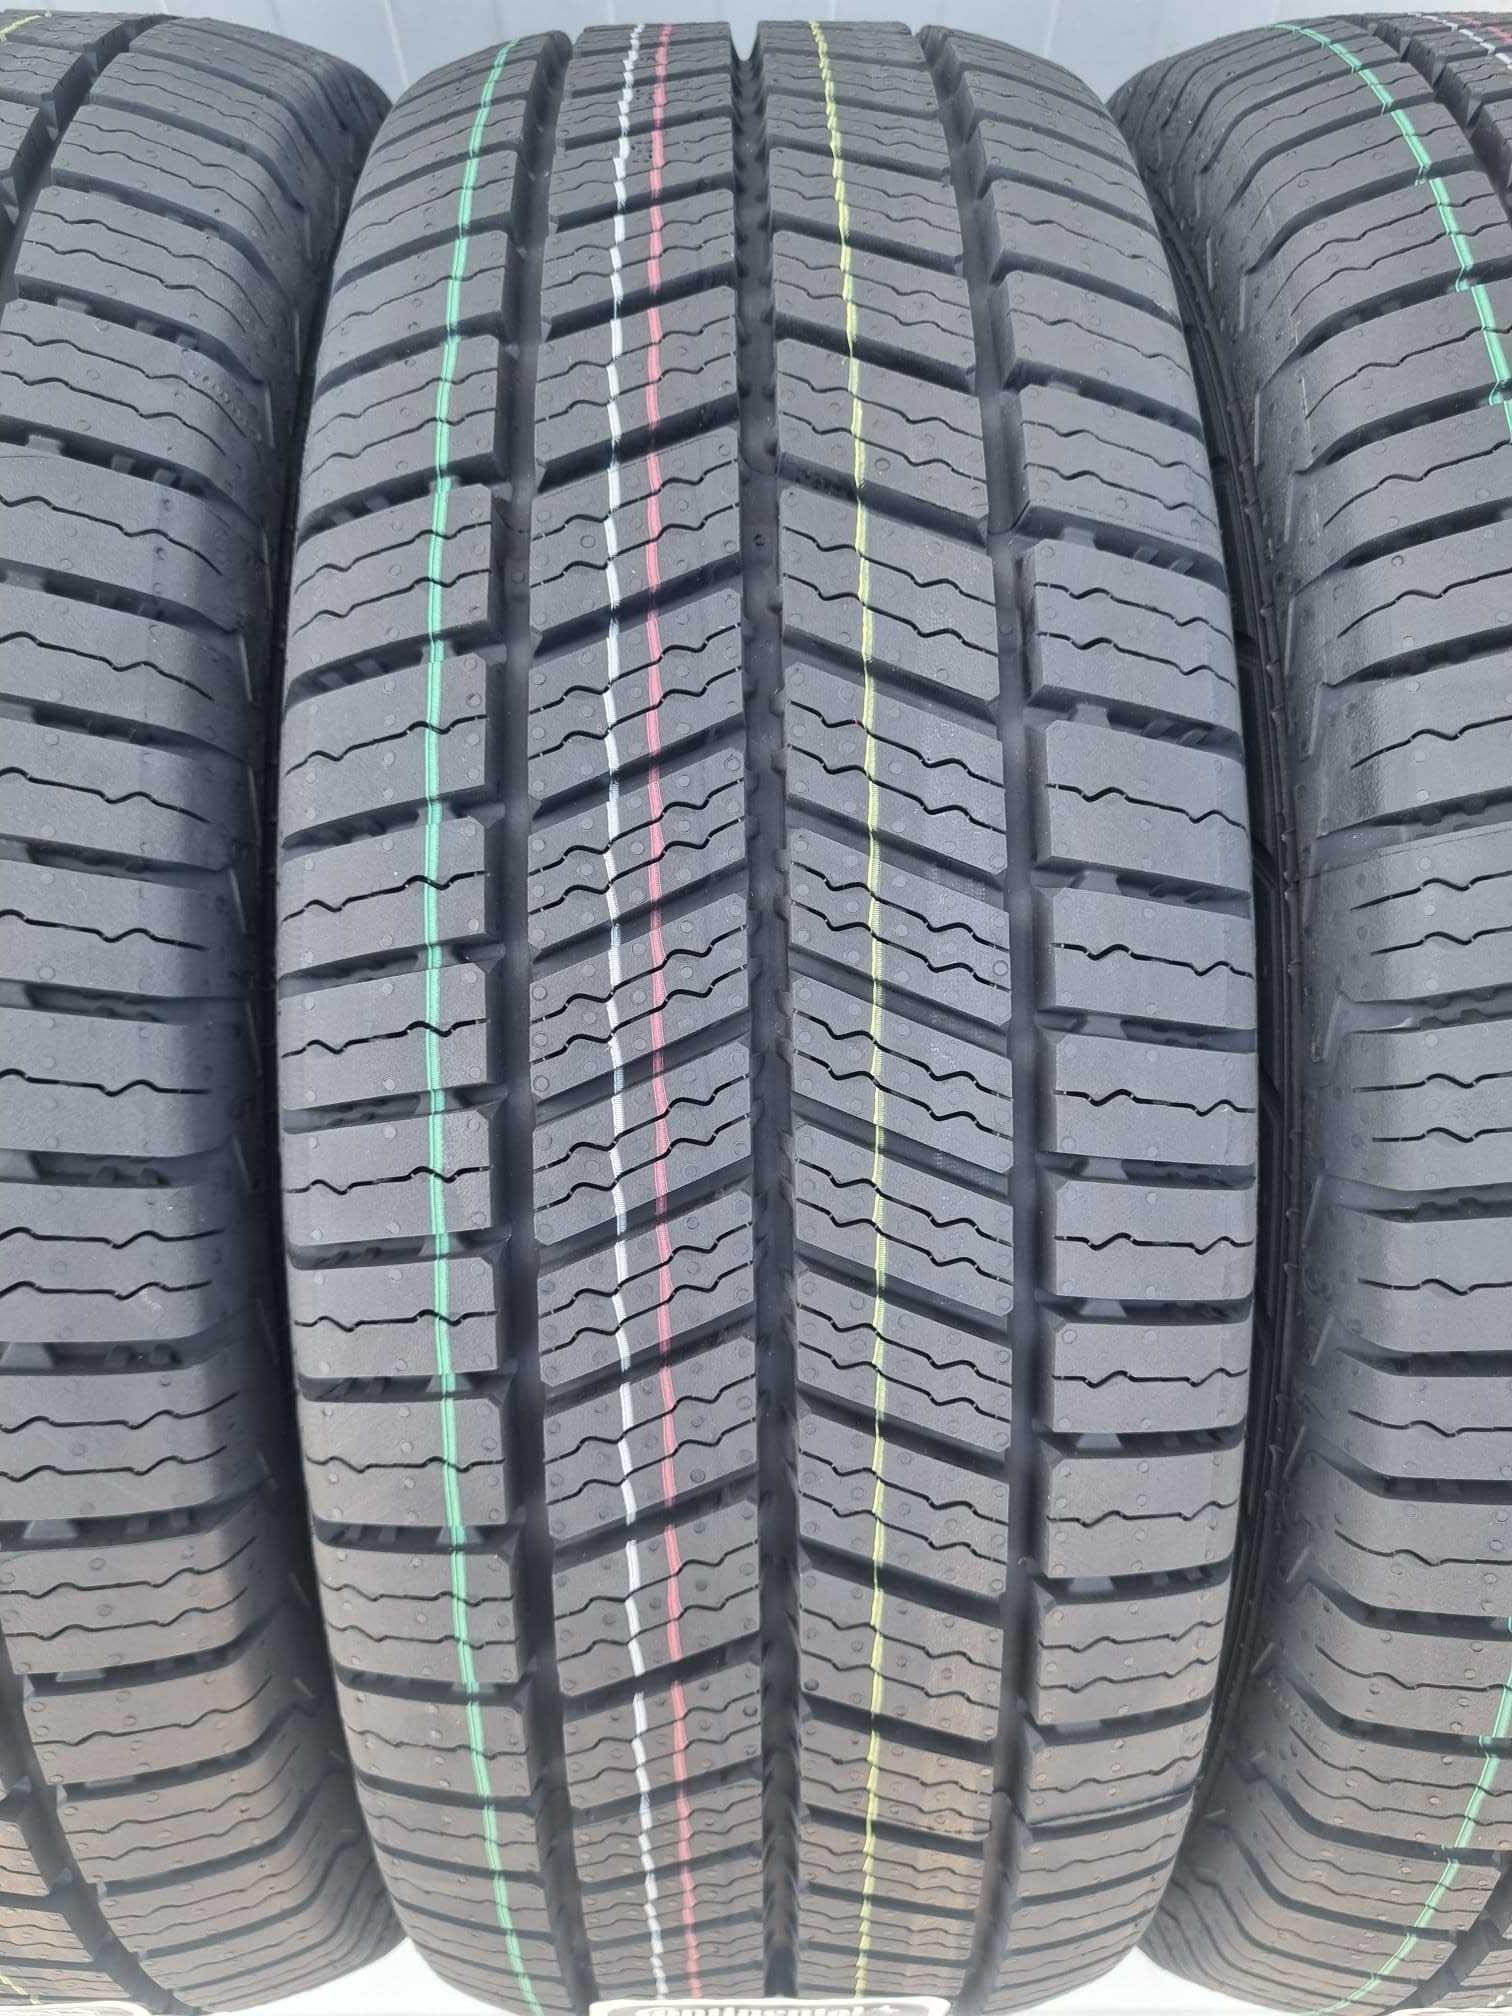 225/70 R15C, 112R, CONTINENTAL, Vancontact A/S, Anvelope mixte M+S